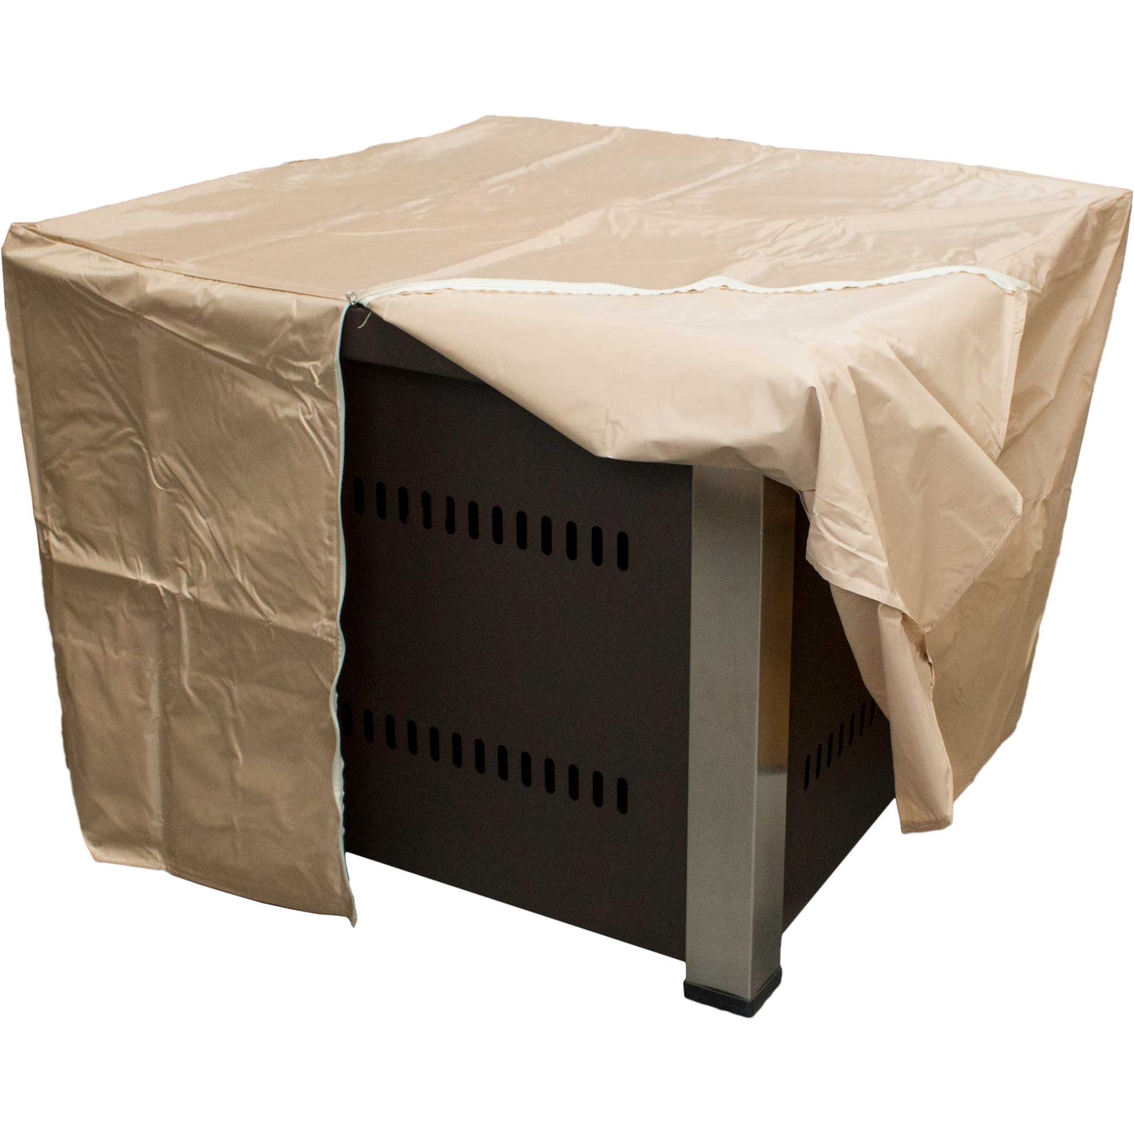 AZ Patio Heaters Square Outdoor Fire Pit Cover - Image 2 of 2